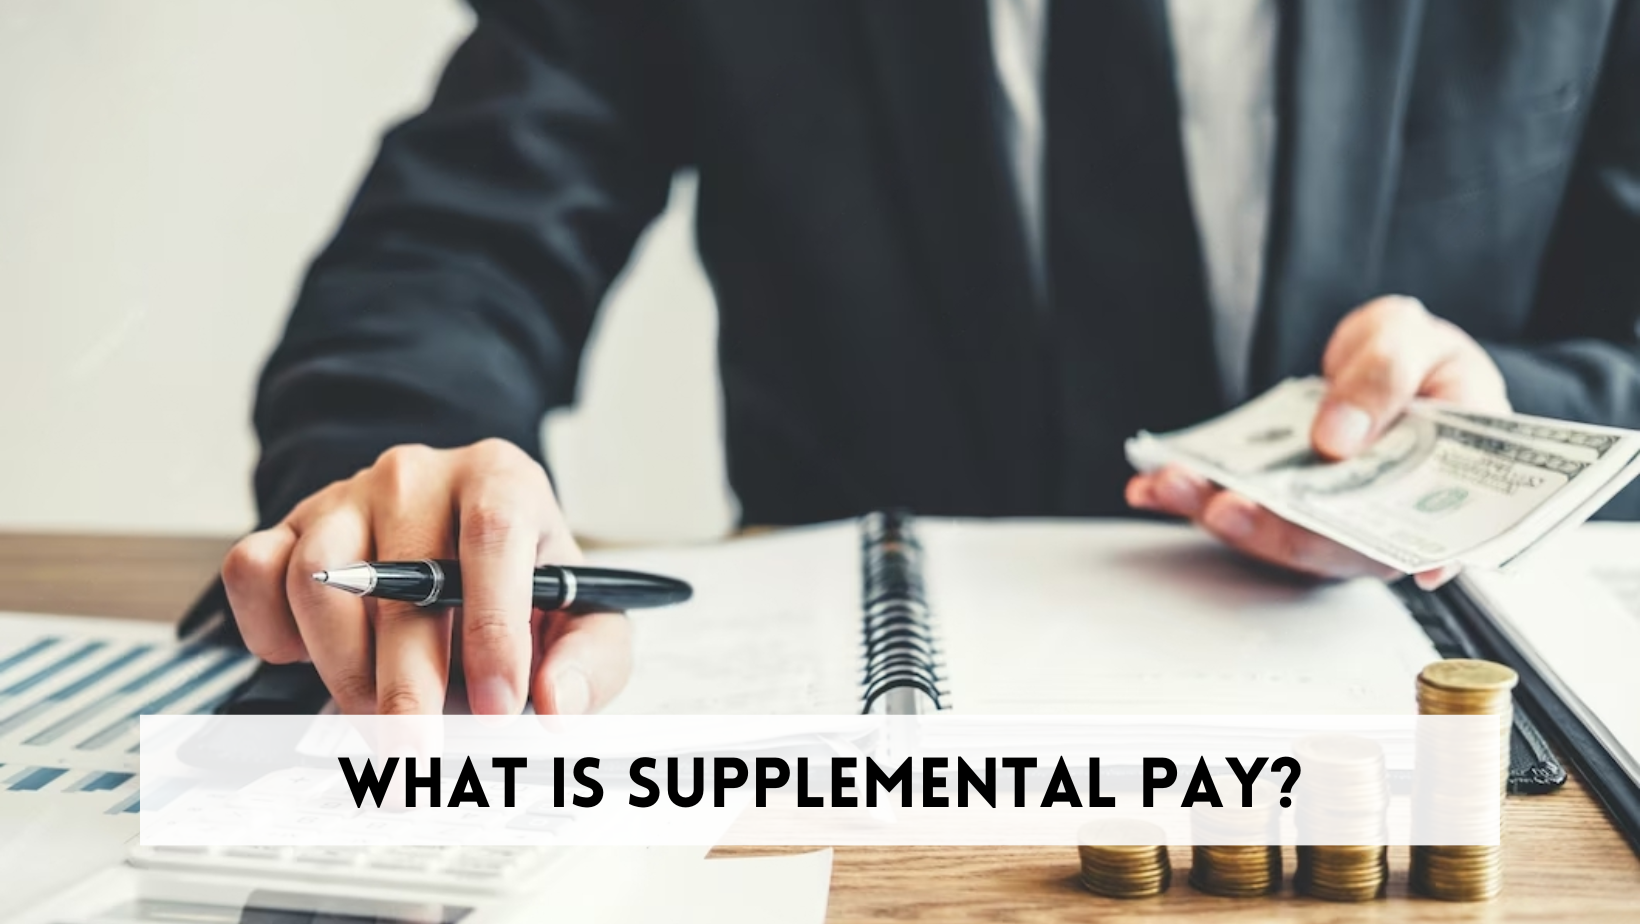 Supplemental Pay